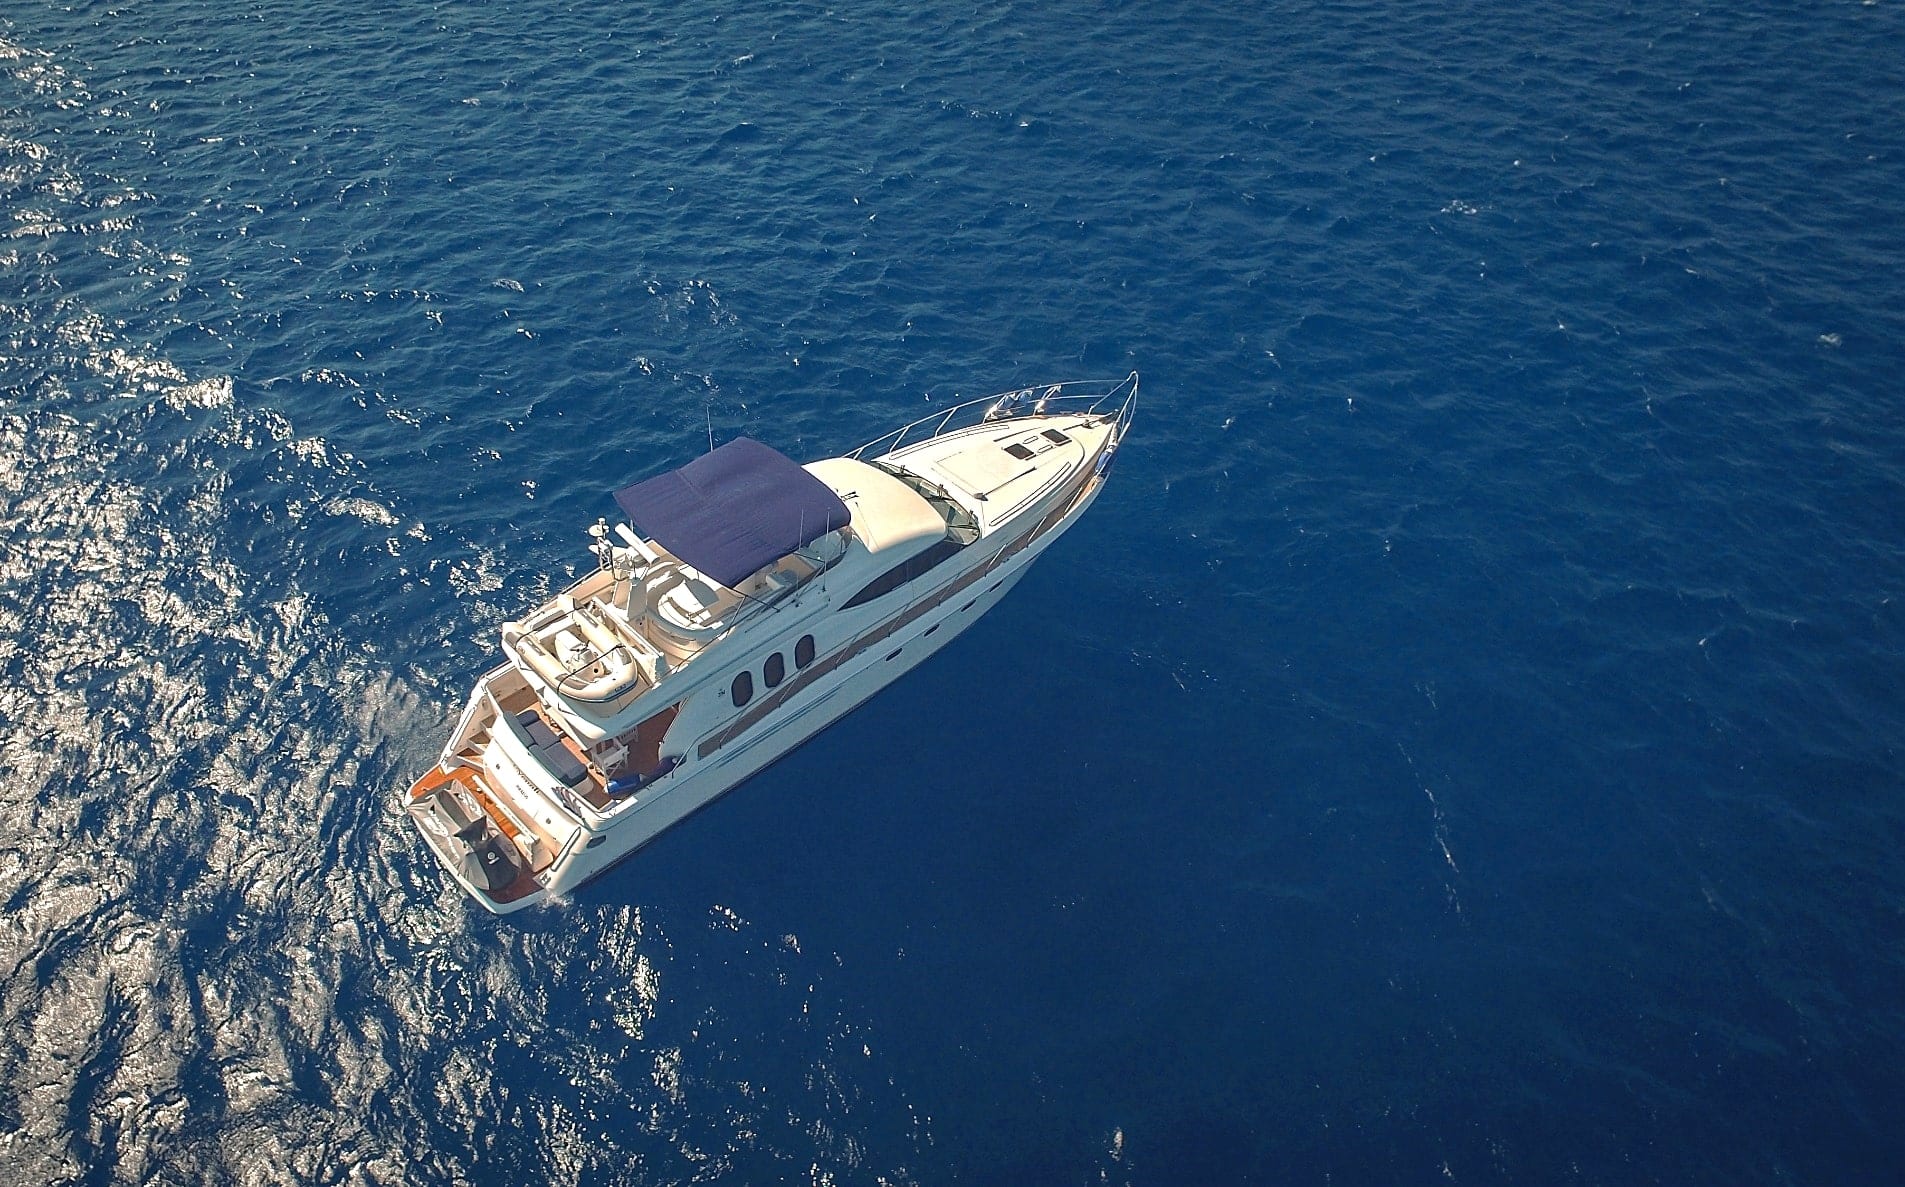 aerial of yacht Venali